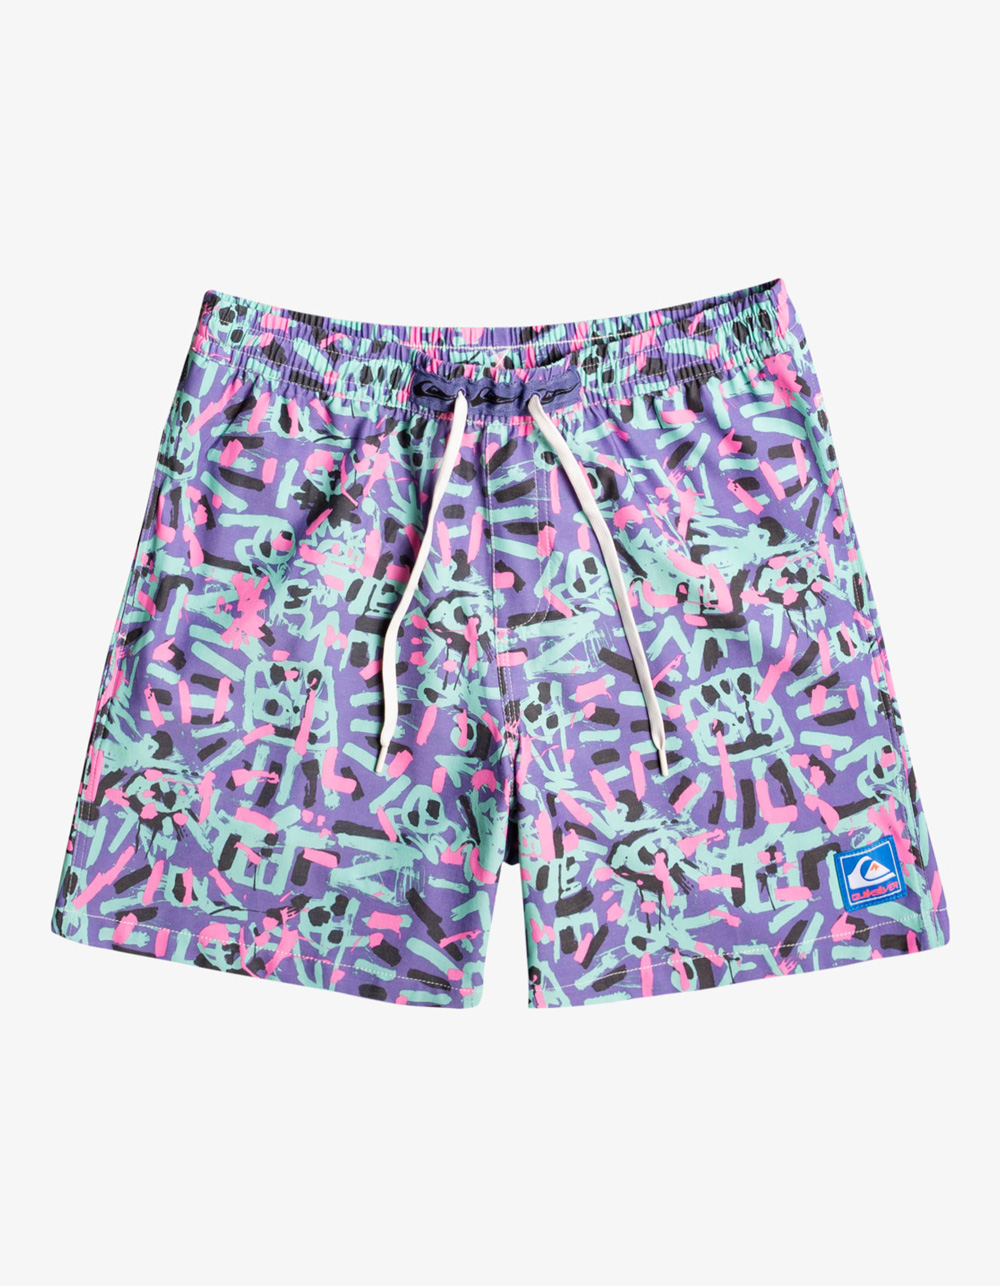 QUIKSILVER x Stranger Things 1986 Mens Volley Shorts - PURPLE COMBO ...